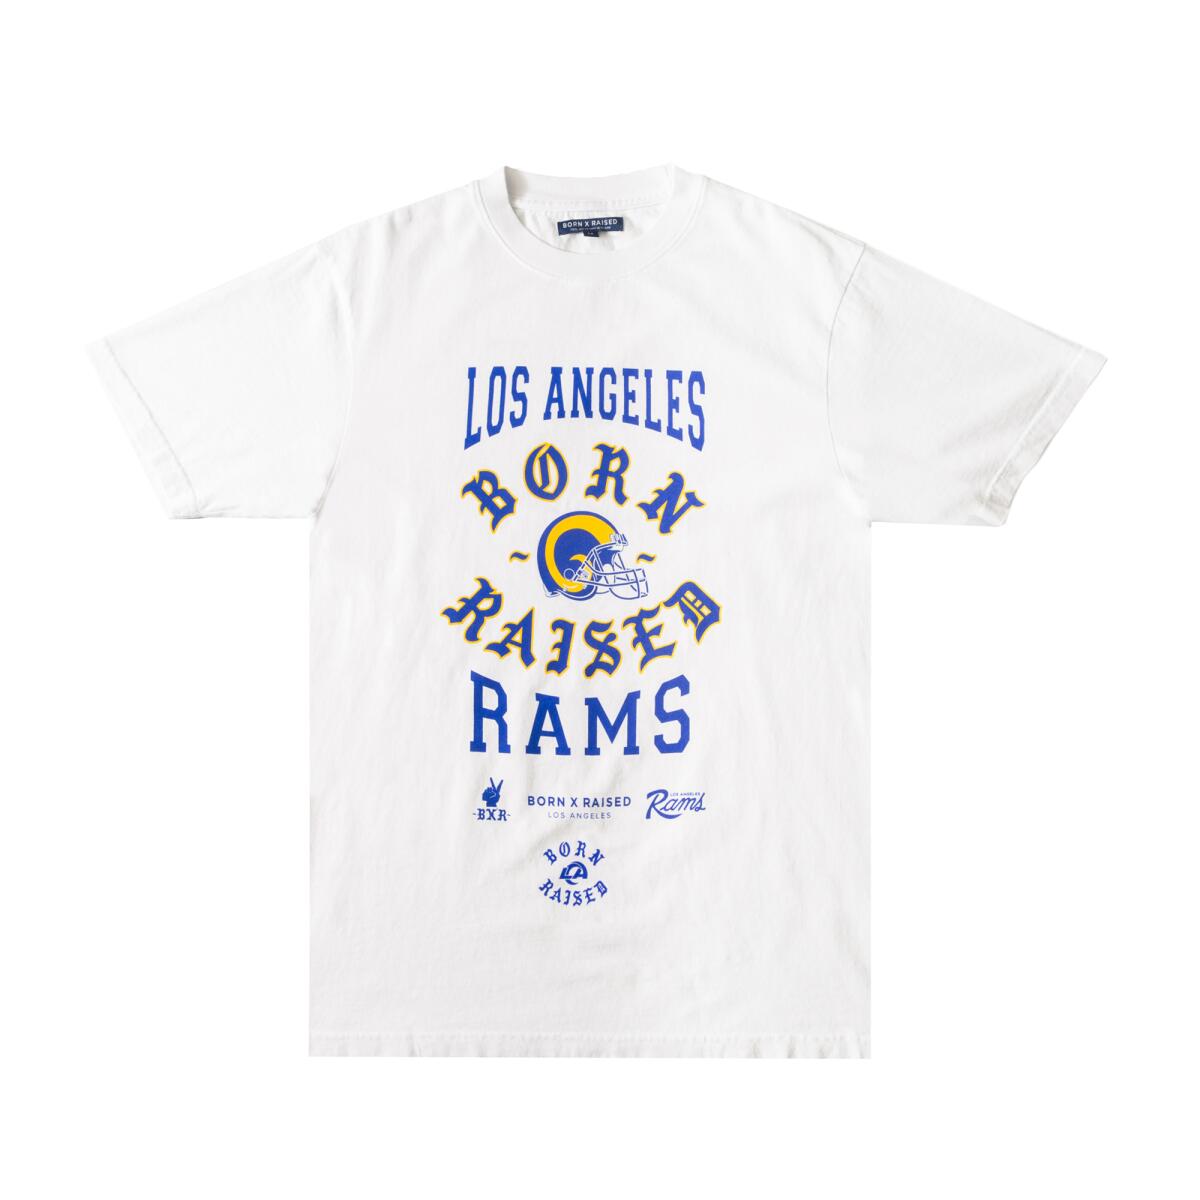 Born X Raised L.A. Rams streetwear sells out in minutes - Los